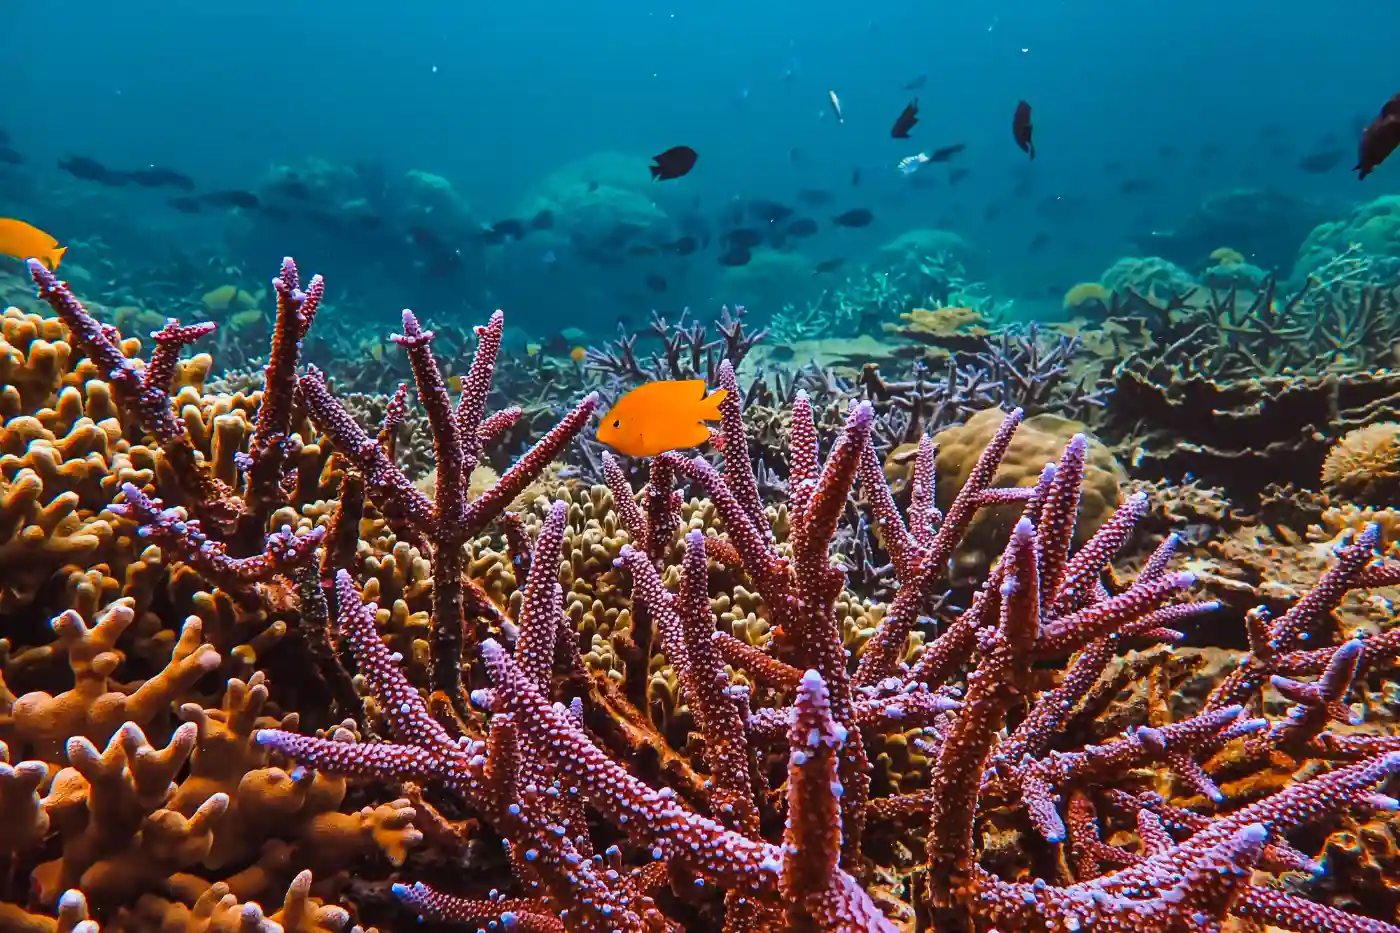 Vibrant coral reef with purple staghorn corals and a bright orange fish in Mantanani Island waters.